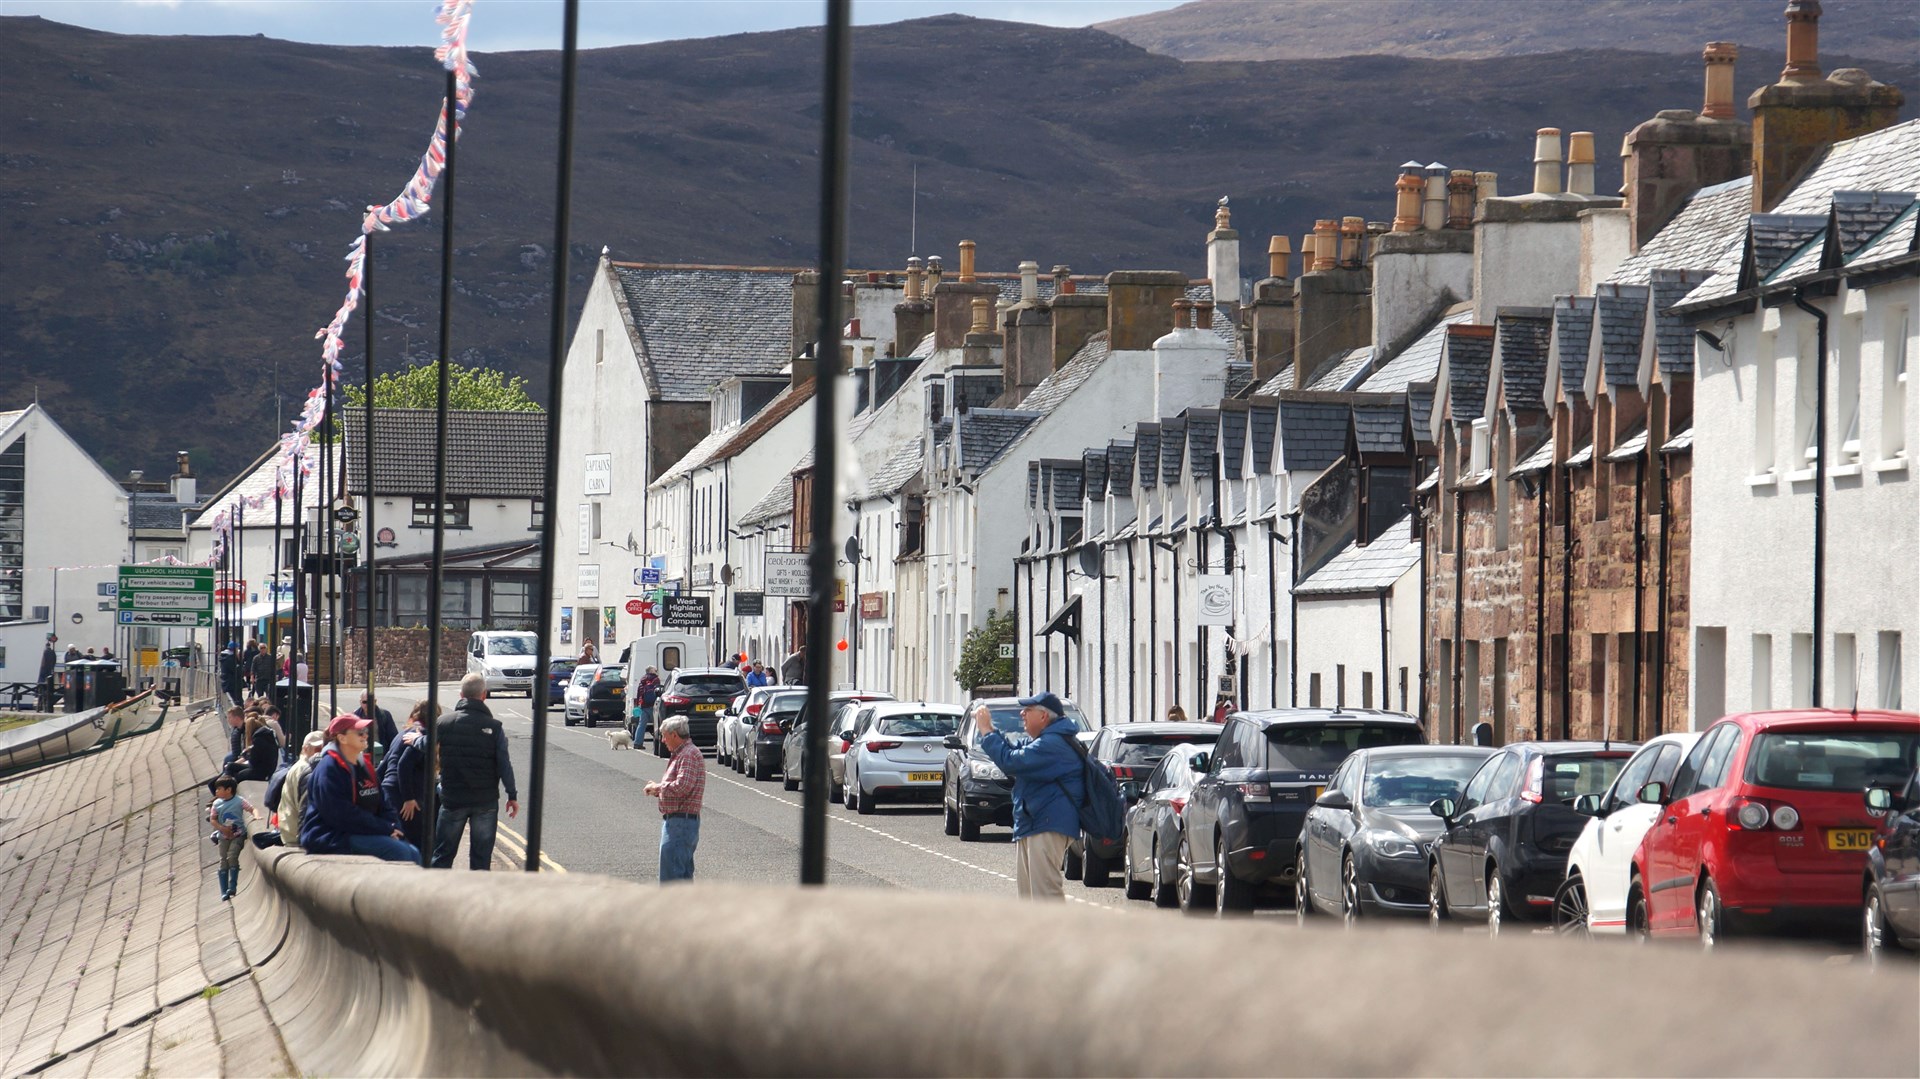 The scheme will have a major impact on the Wester Ross village of Ullapool, councillors heard.